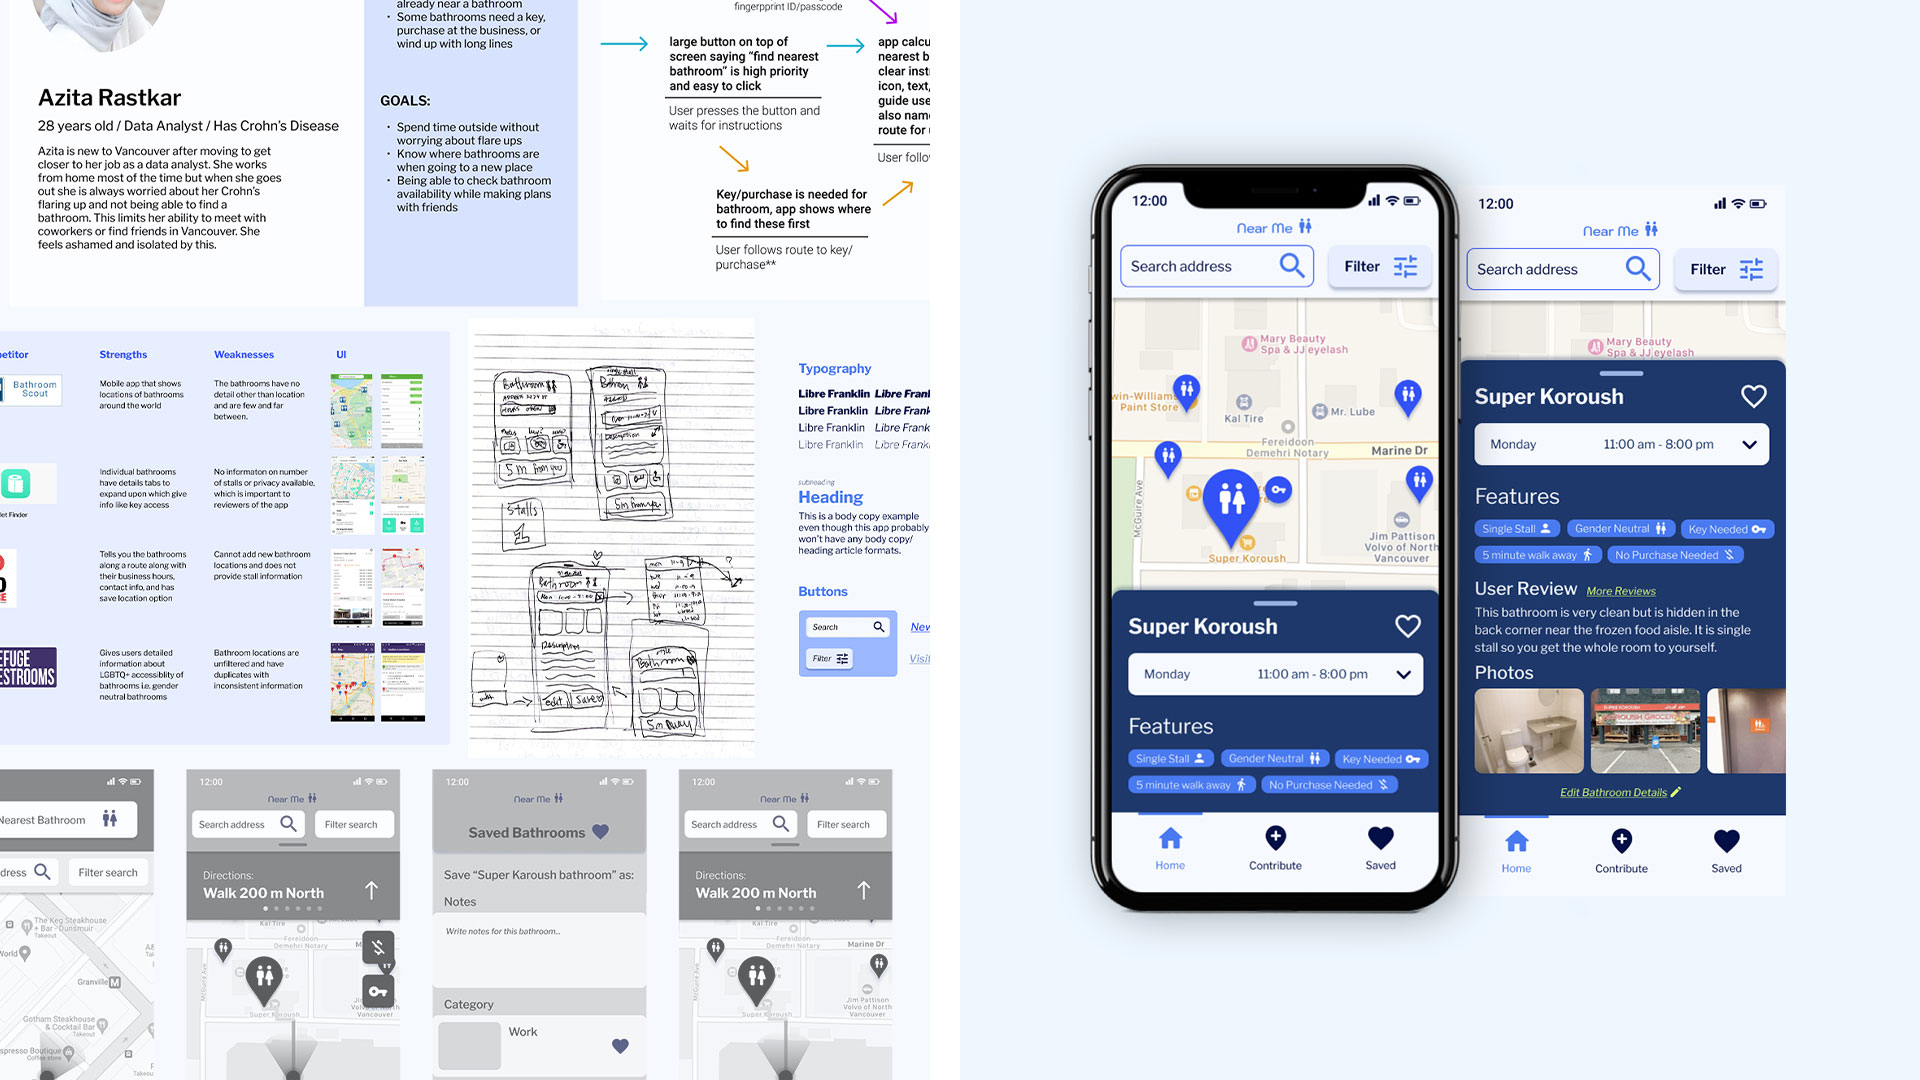 On the left is a collage of UX development work for NearMe showing a user persona, userflow, sketches, wireframes, competitive analysis, and style tile. On the right is an iphone mockup showing details of the app.